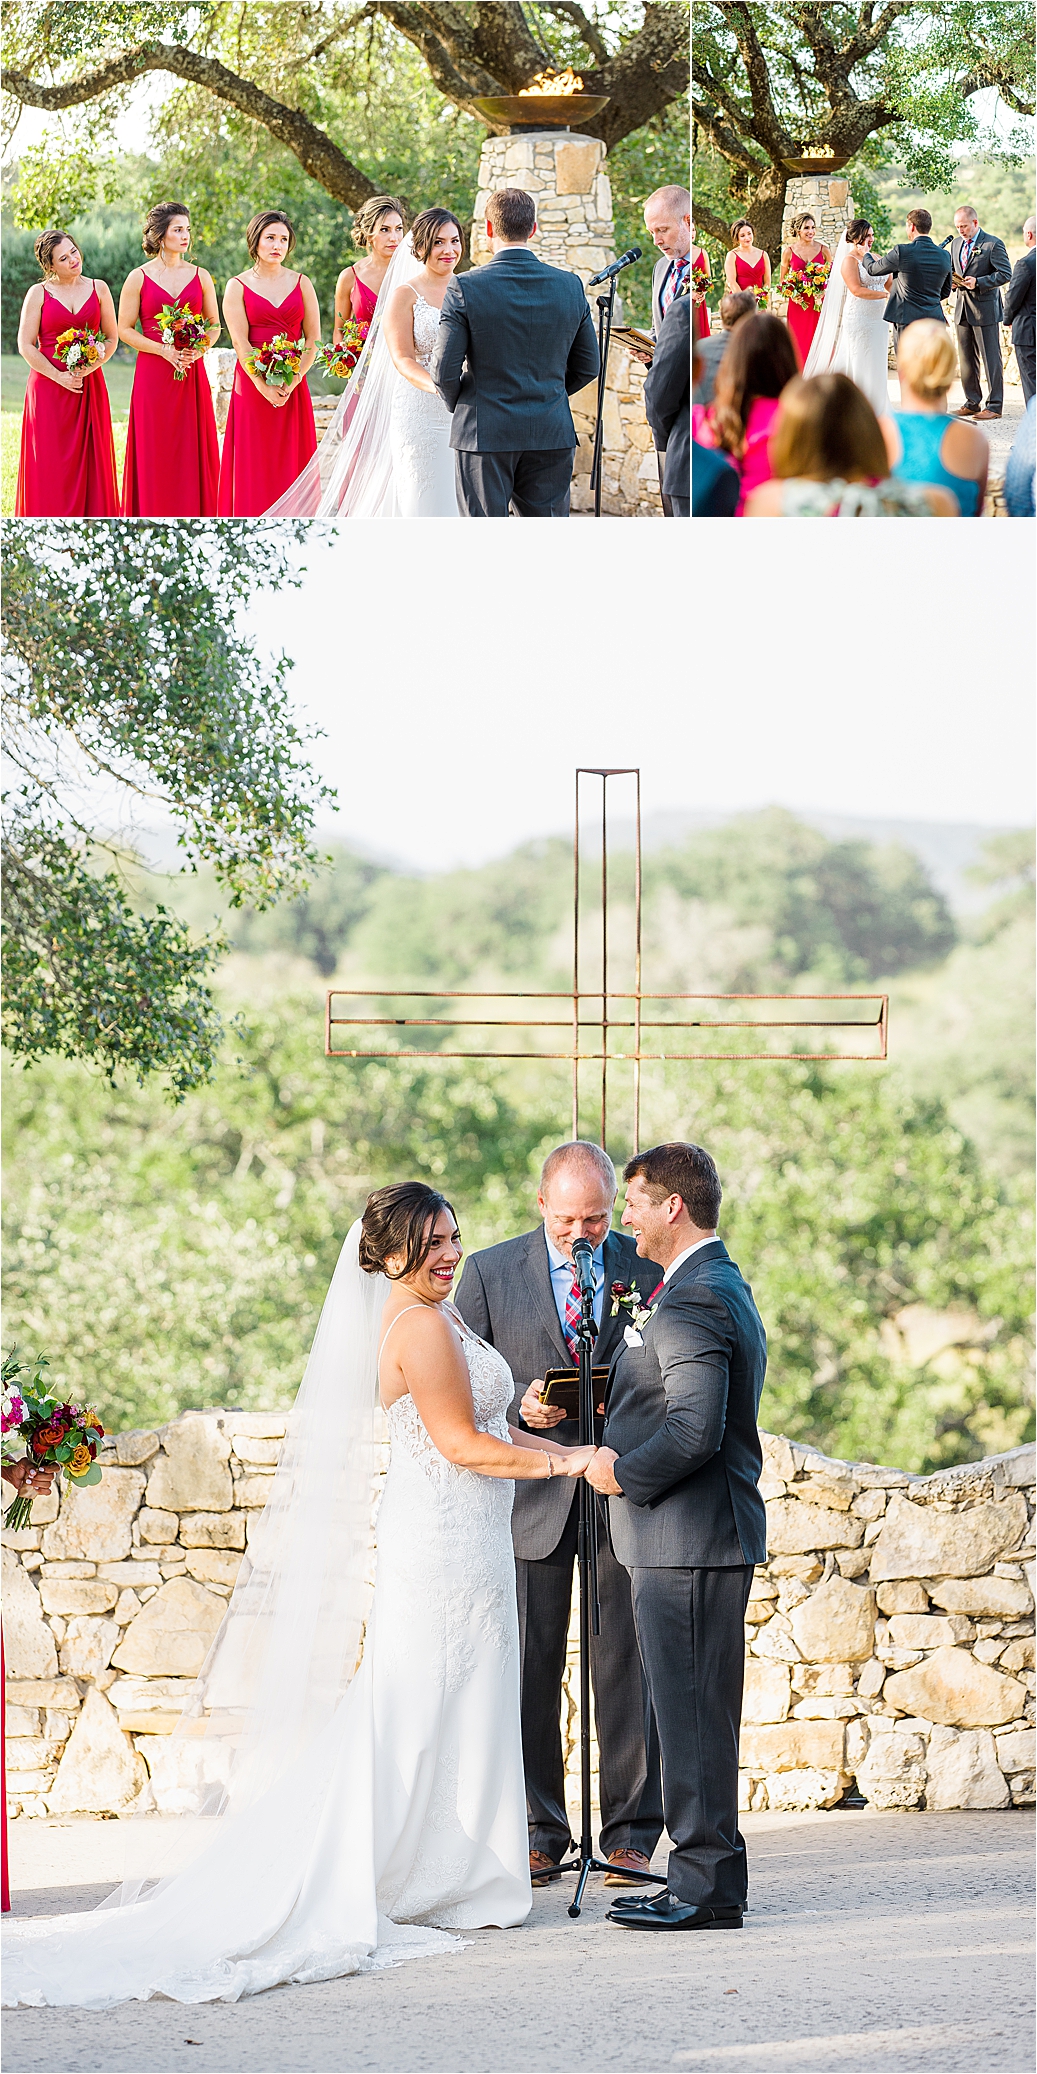 A bride and groom laugh during their wedding ceremony at Paniolo Ranch in Boerne, Texas